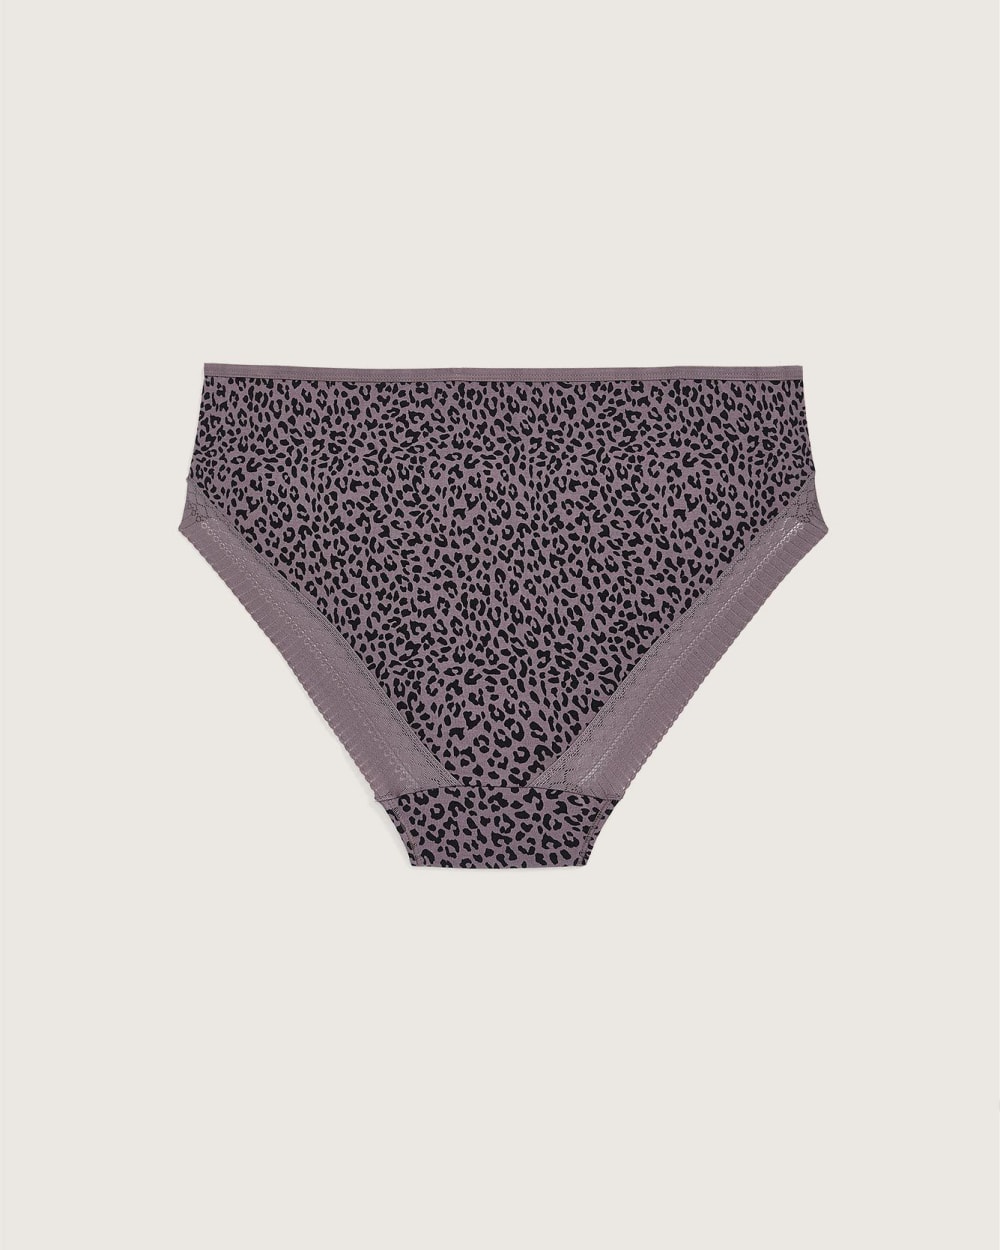 Printed High-Cut Brief with Lace Details - tiVOGLIO | Penningtons